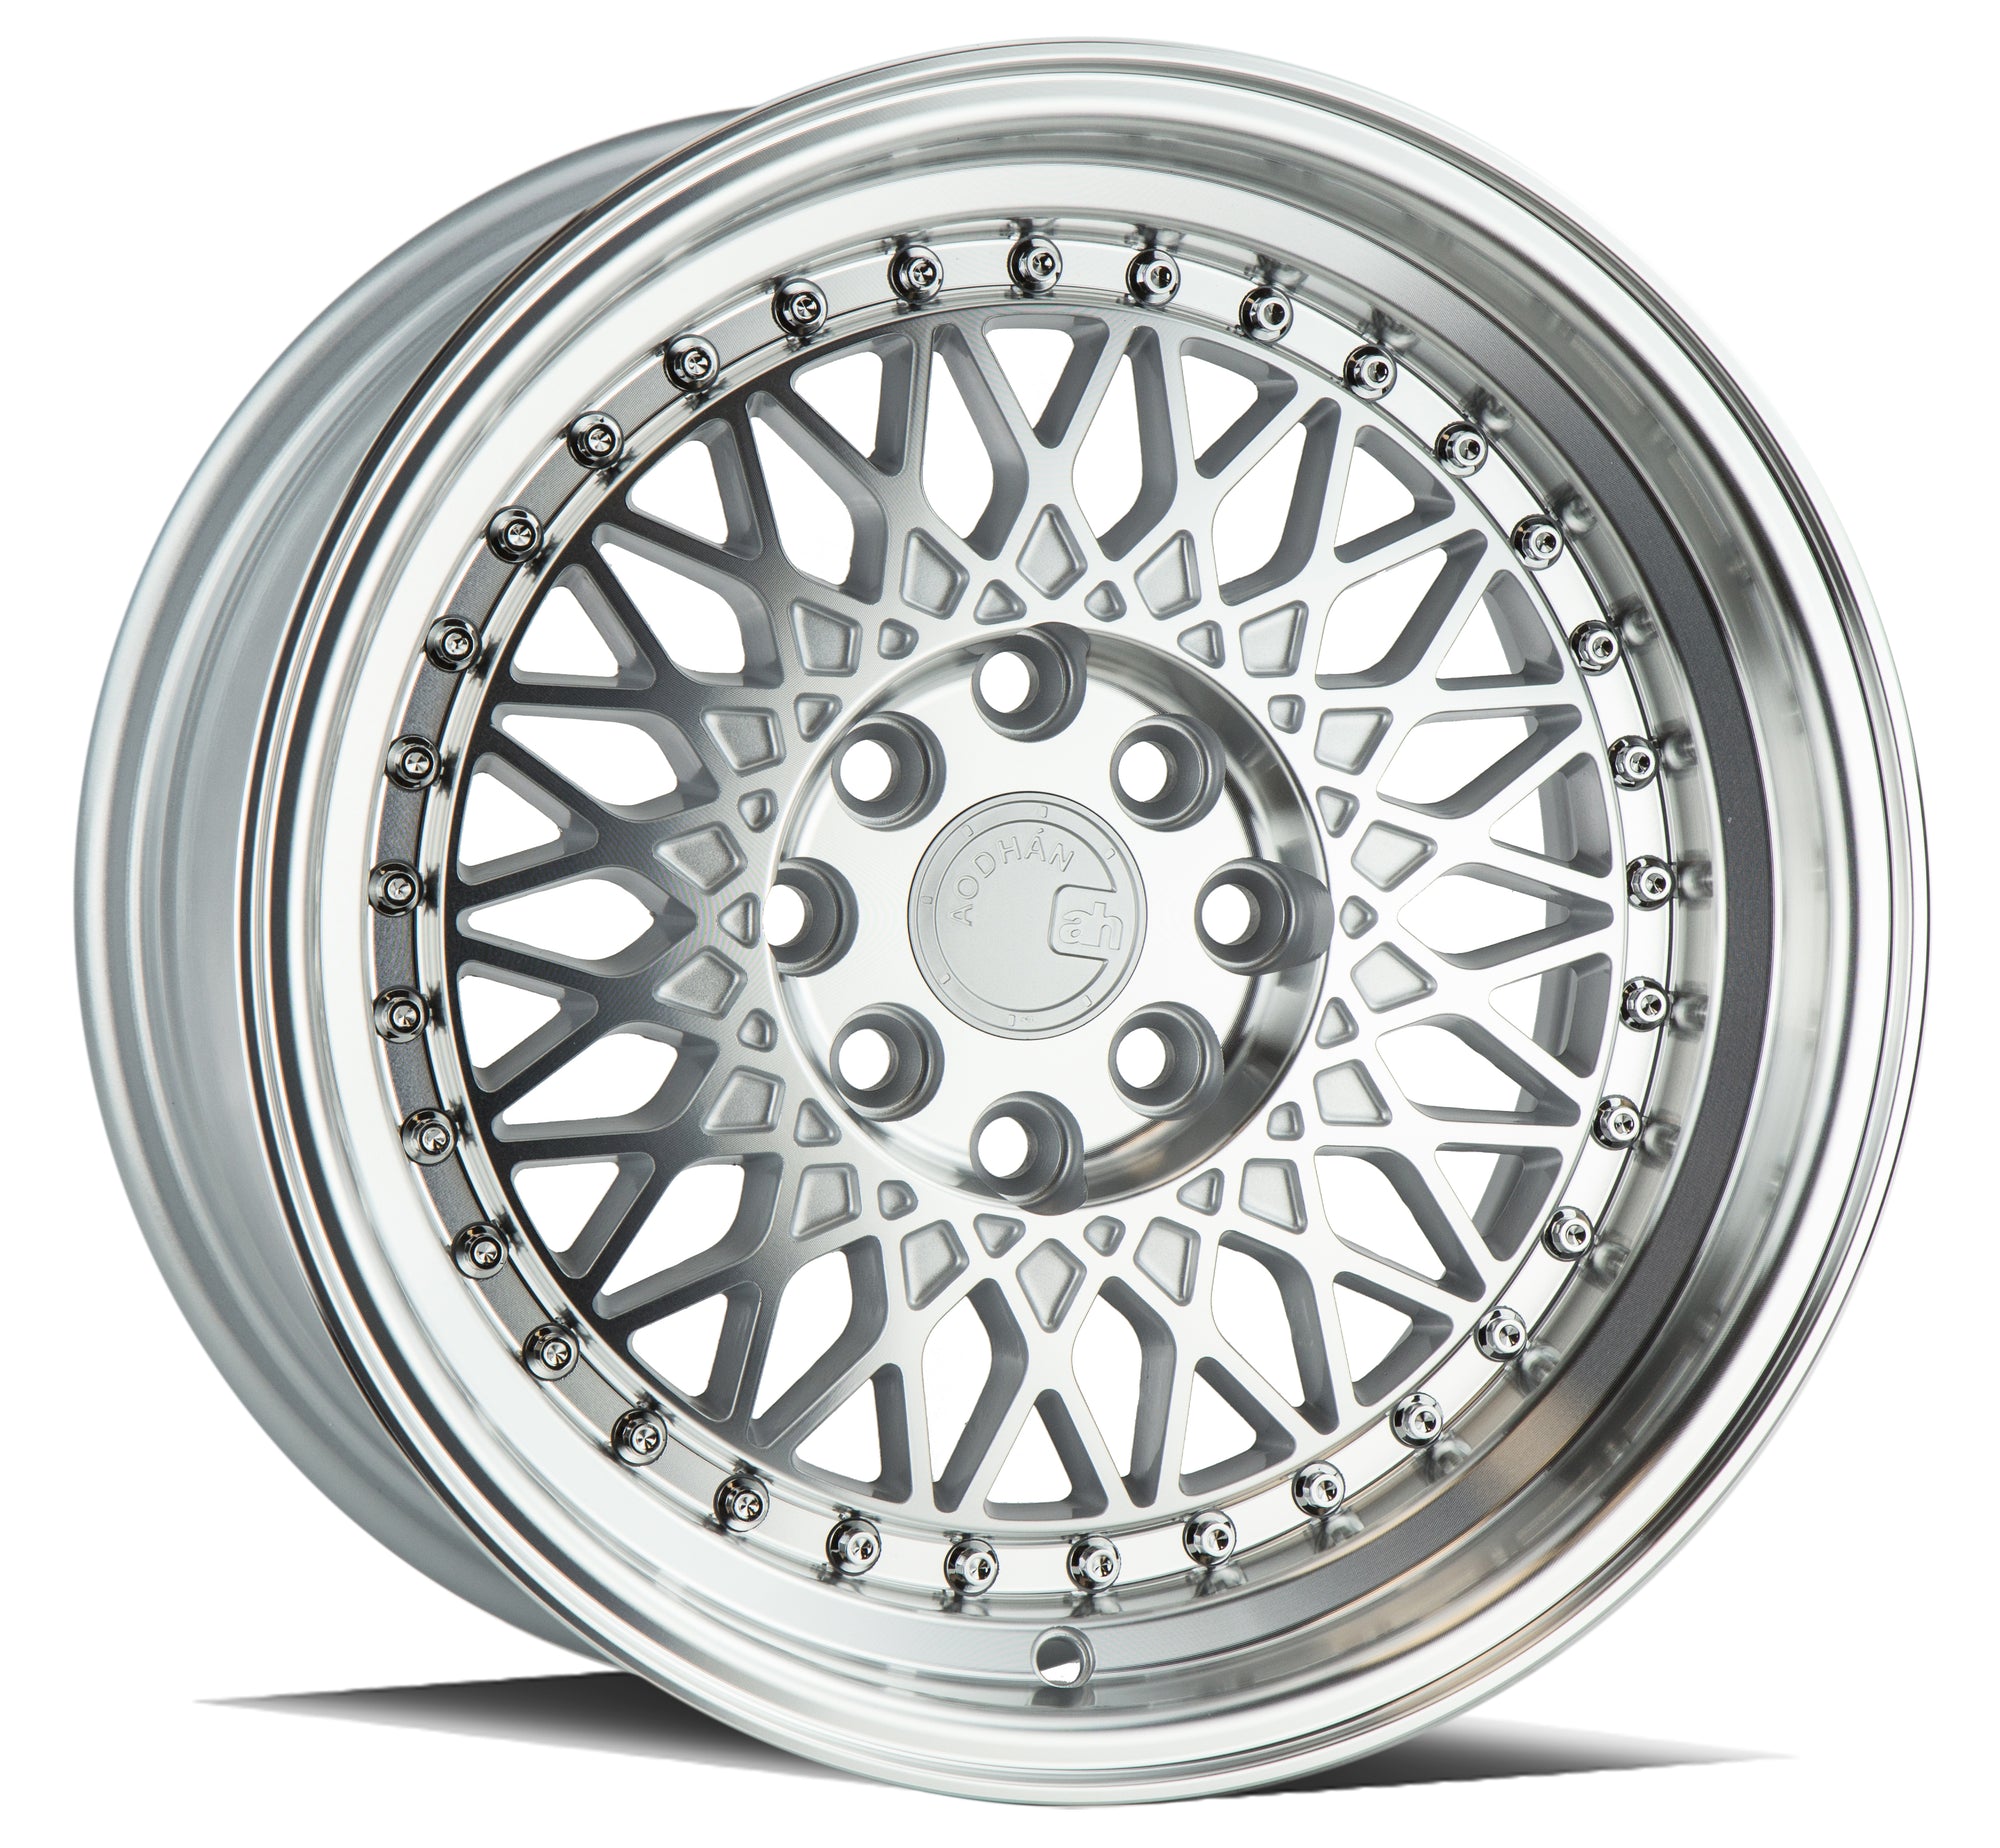 Aodhan AH05 15x8 4x100/114.3 +20 Silver Machined Face And Lip